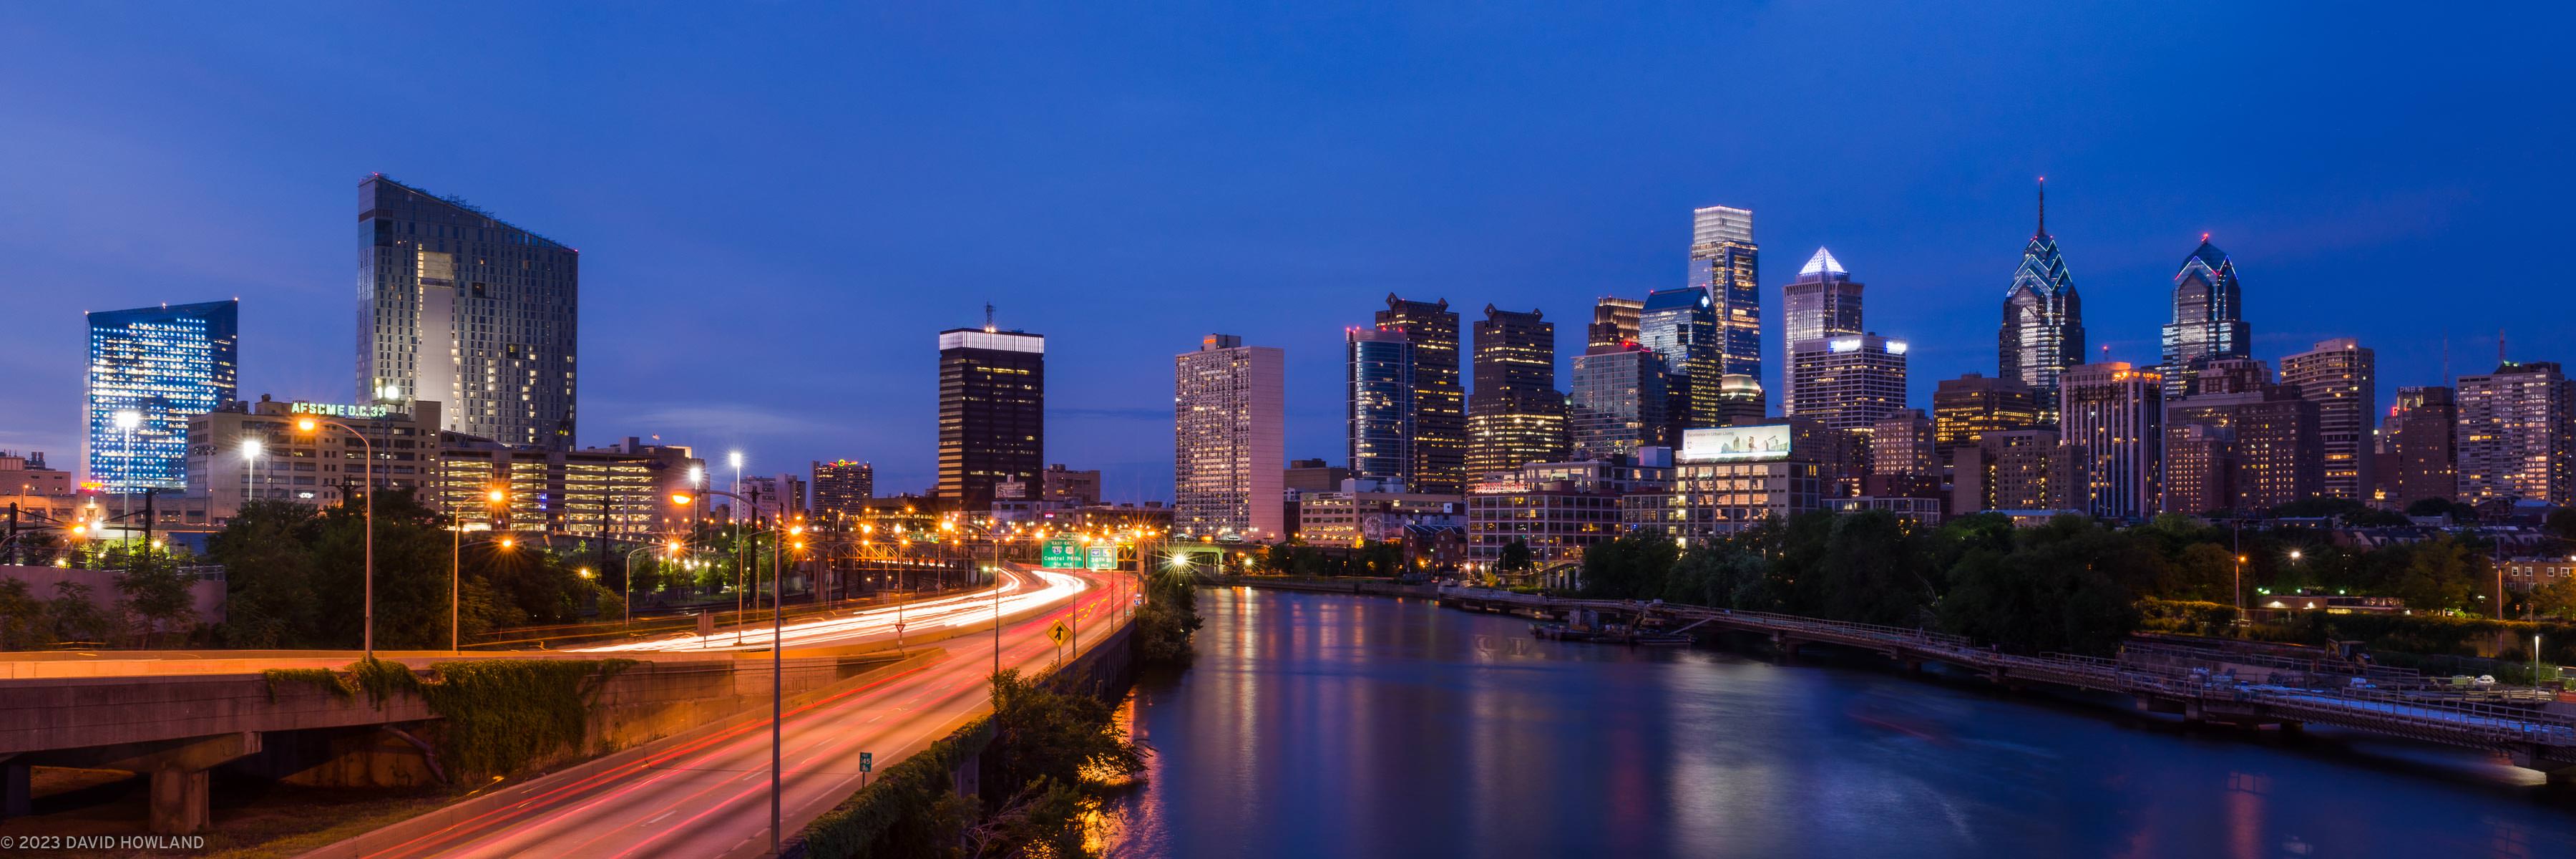 A panorama photo of the Philadelphia skyline and the Schuylkill River taken at sunset from the South Street Bridge